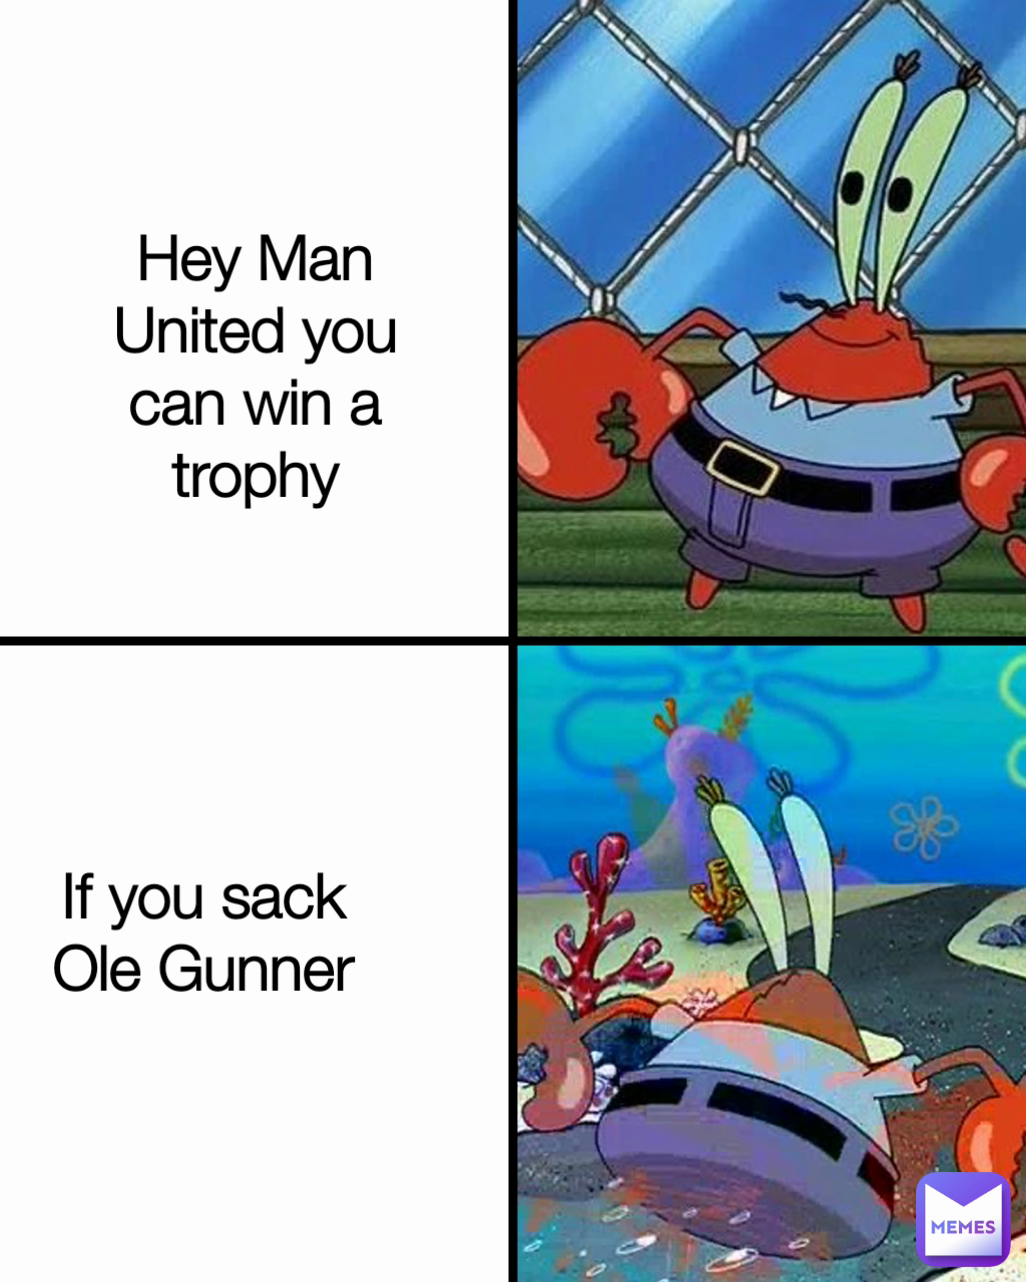 Hey Man United you can win a trophy If you sack Ole Gunner